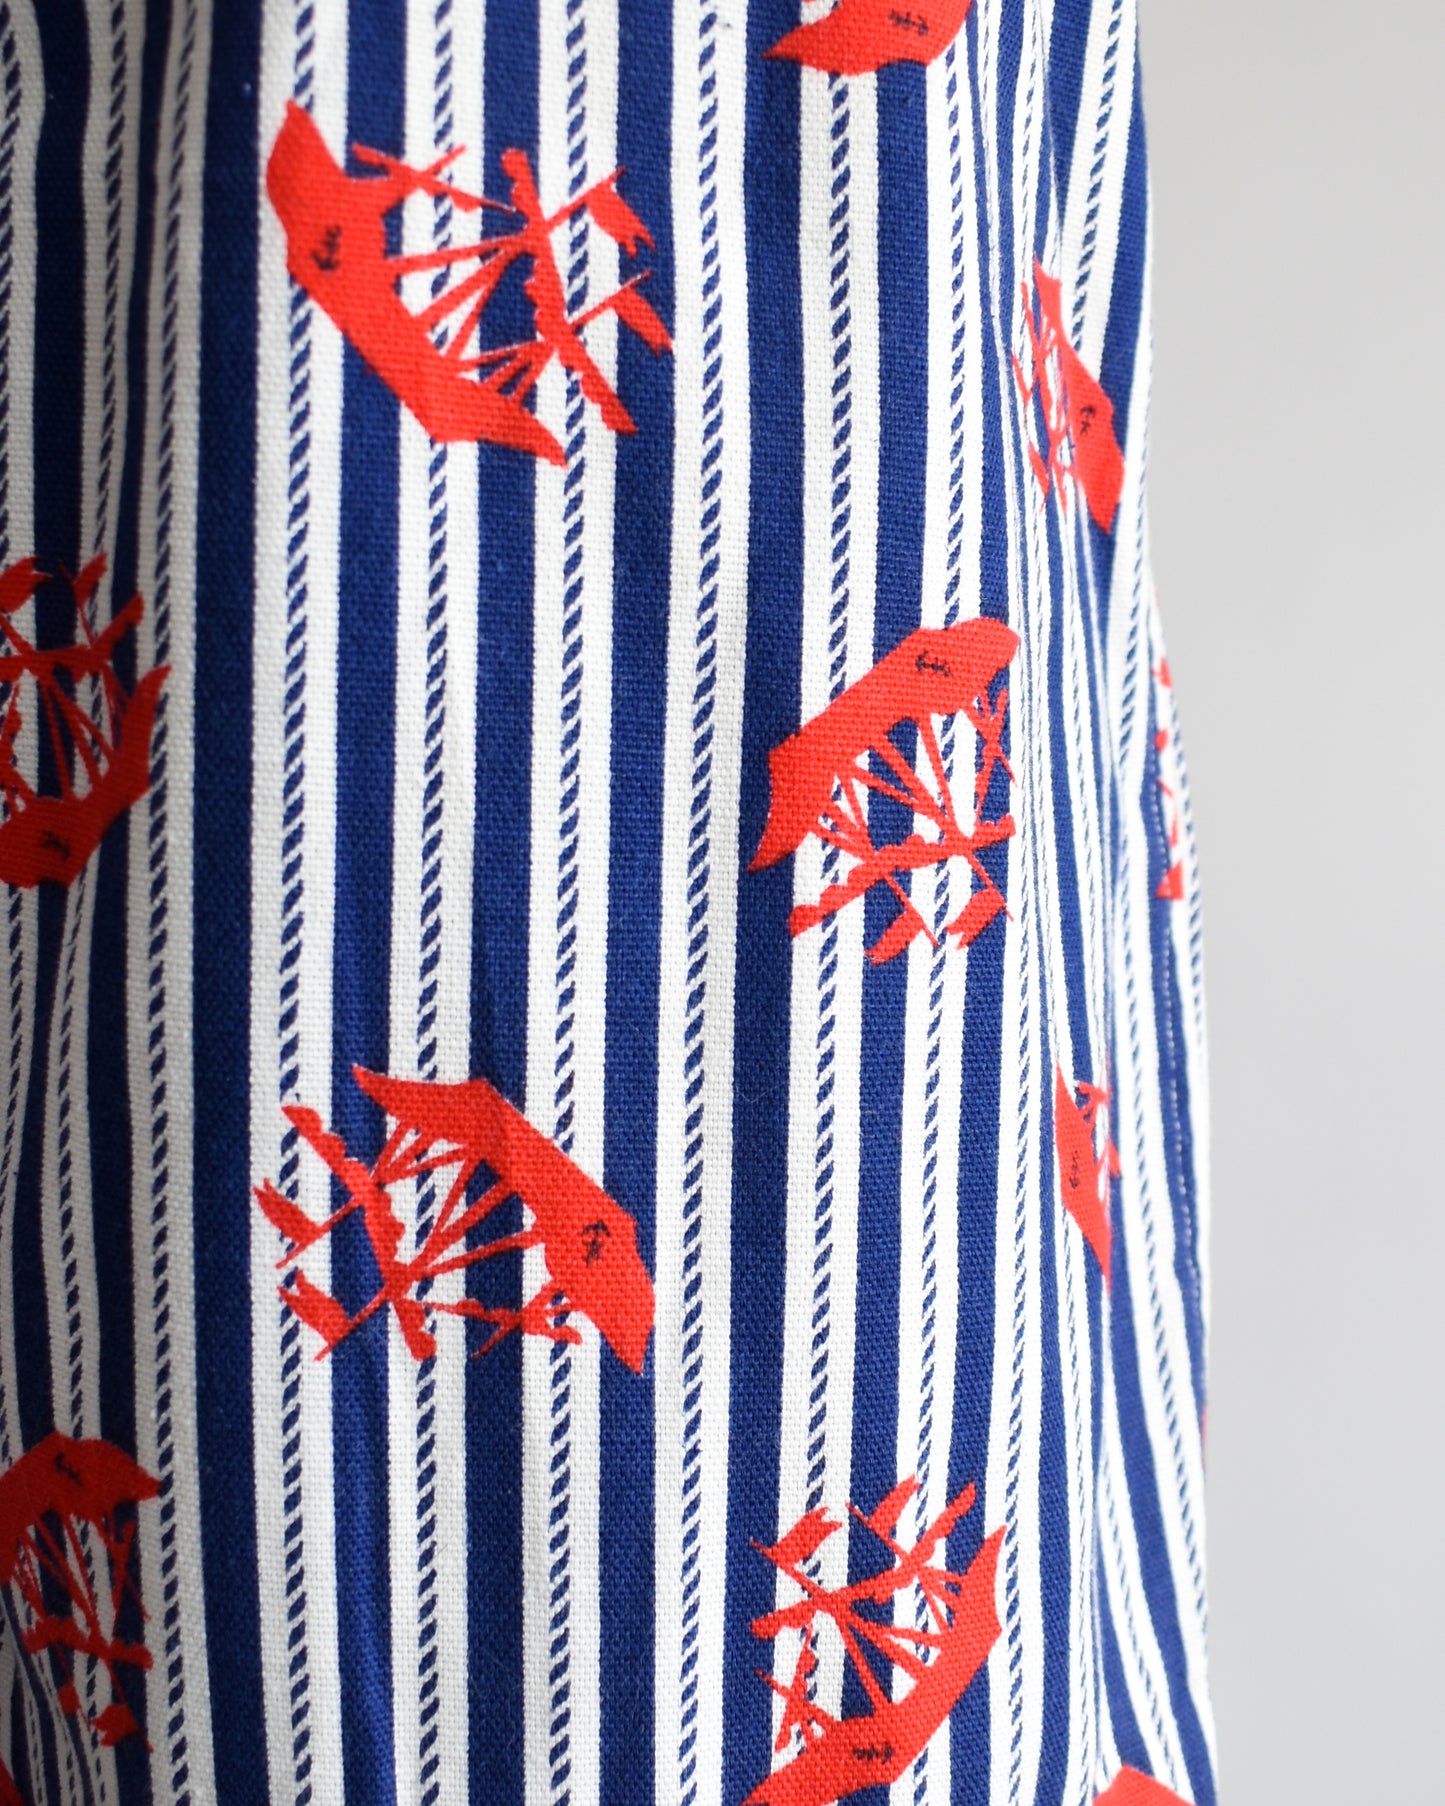 Close up of the stripes and red clipper ship print